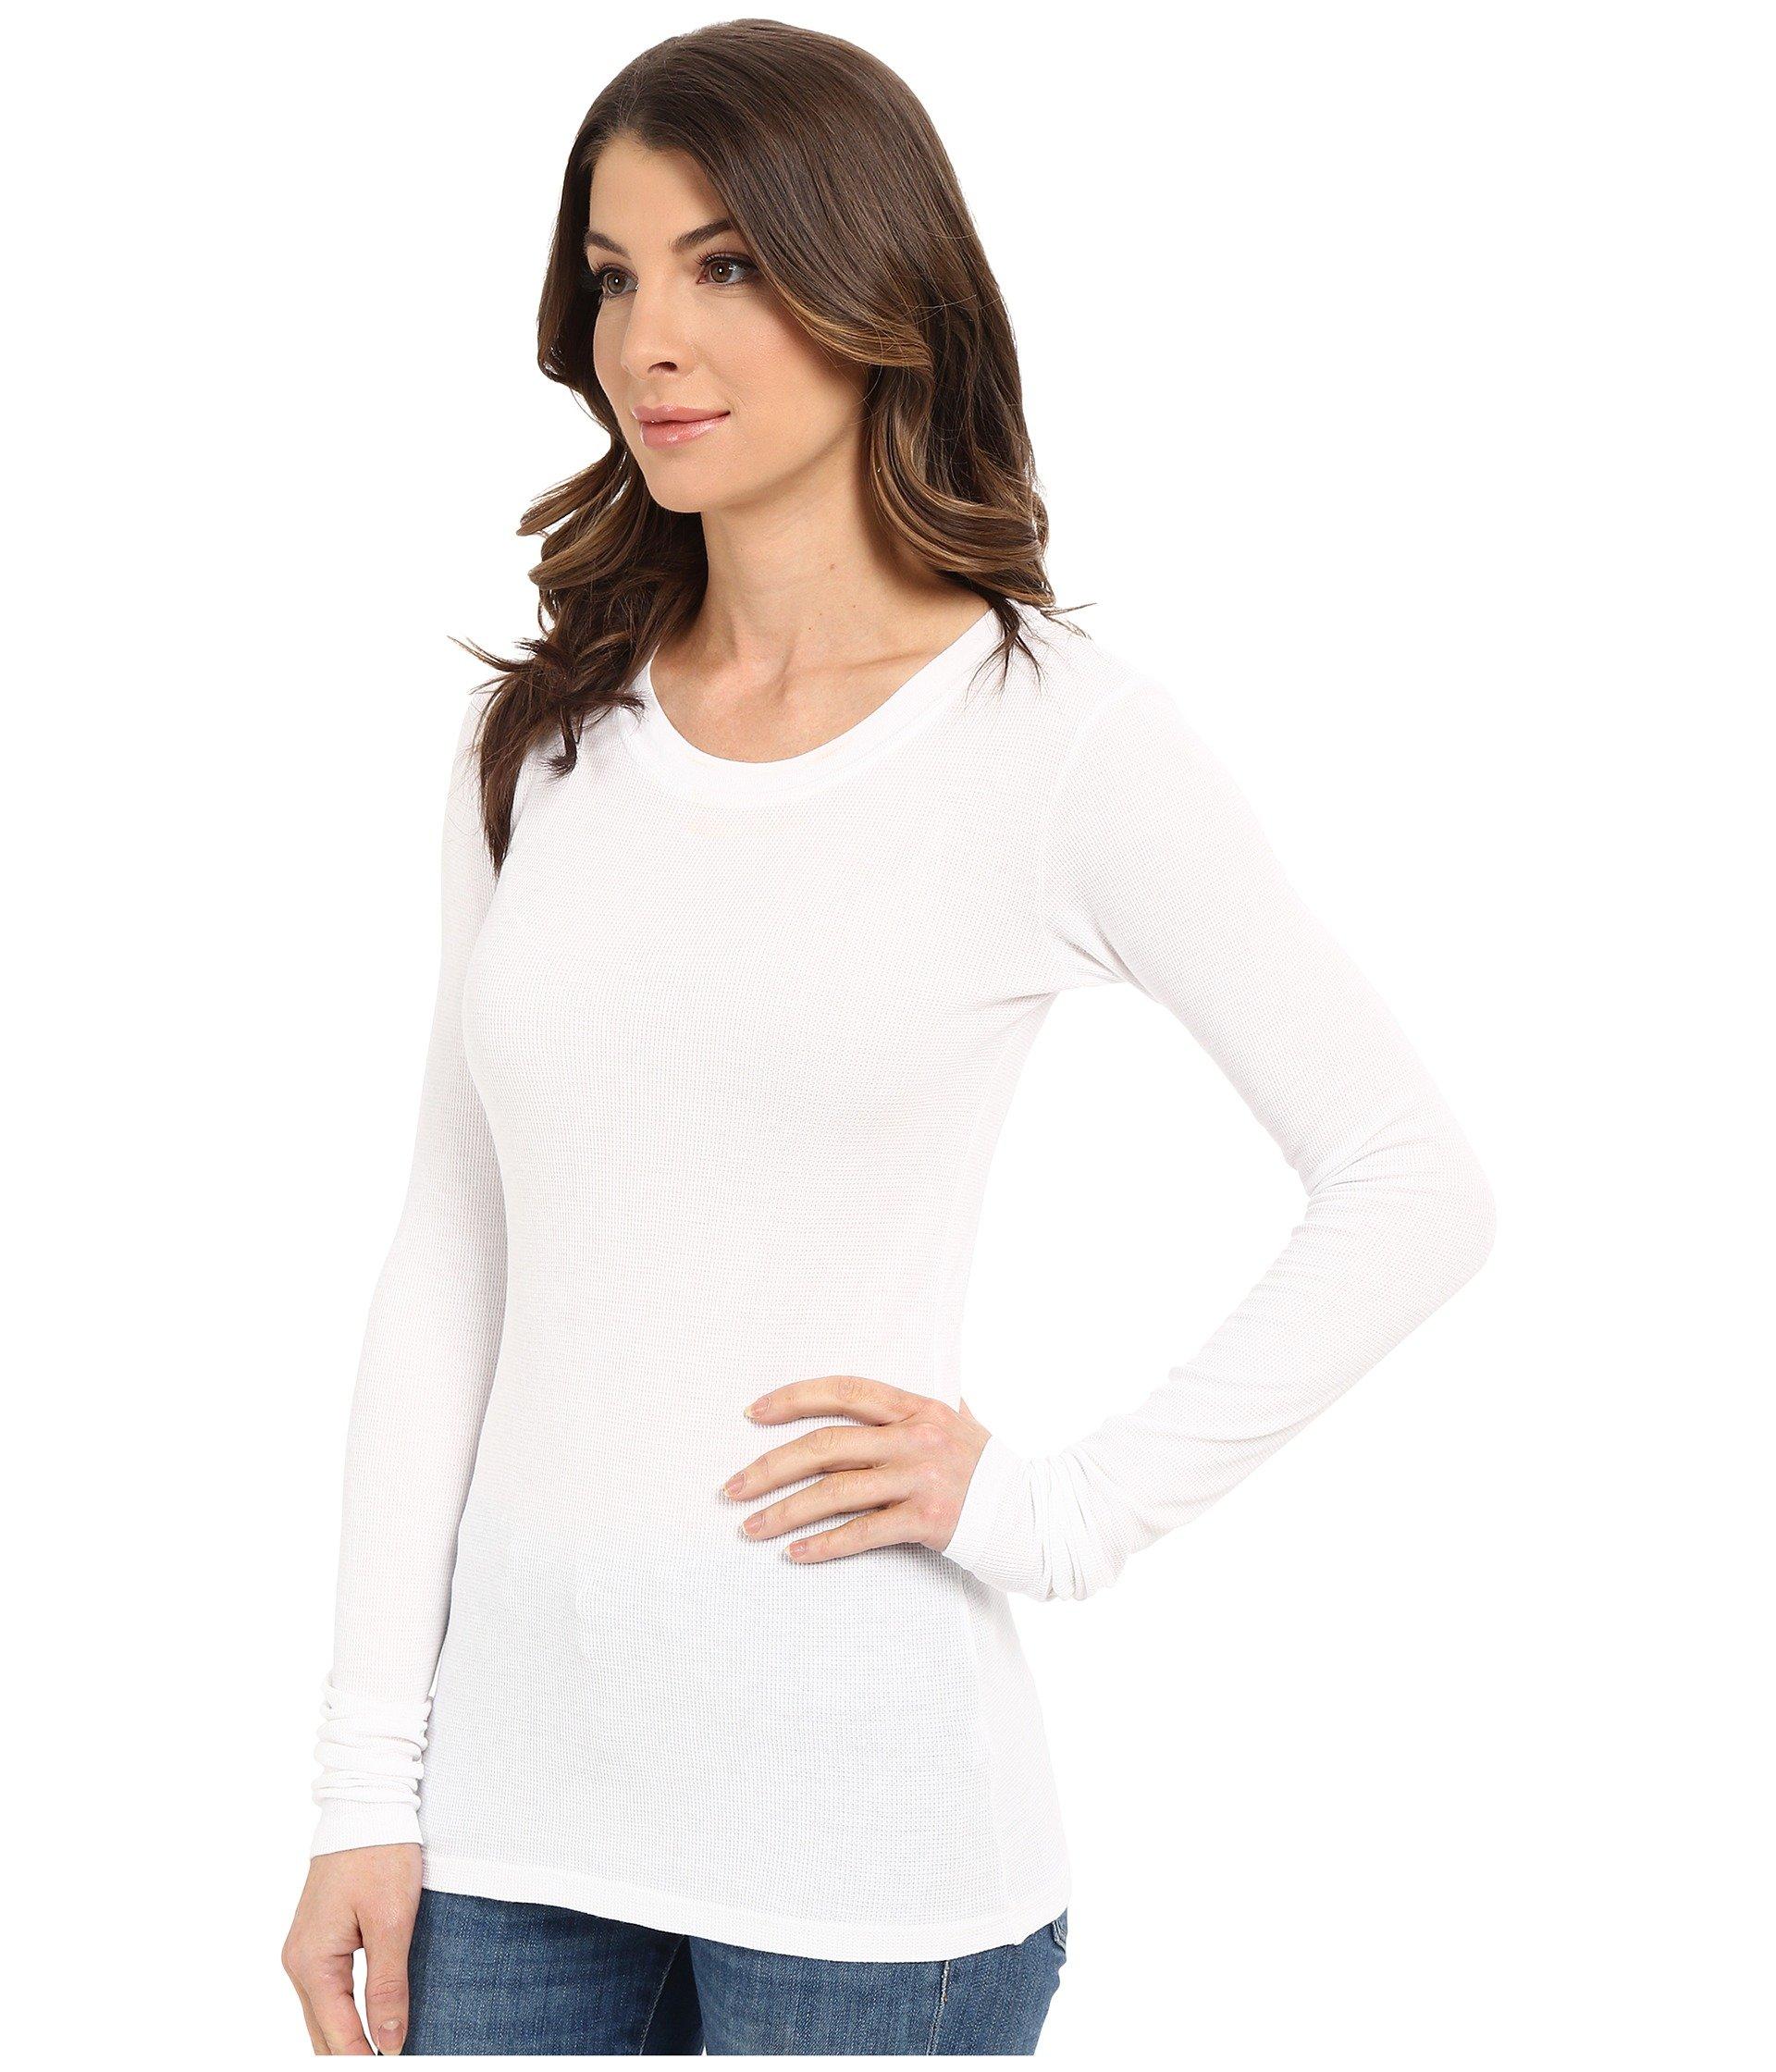 Lamade Long Sleeve Crewneck Thermal Top in White - Lyst